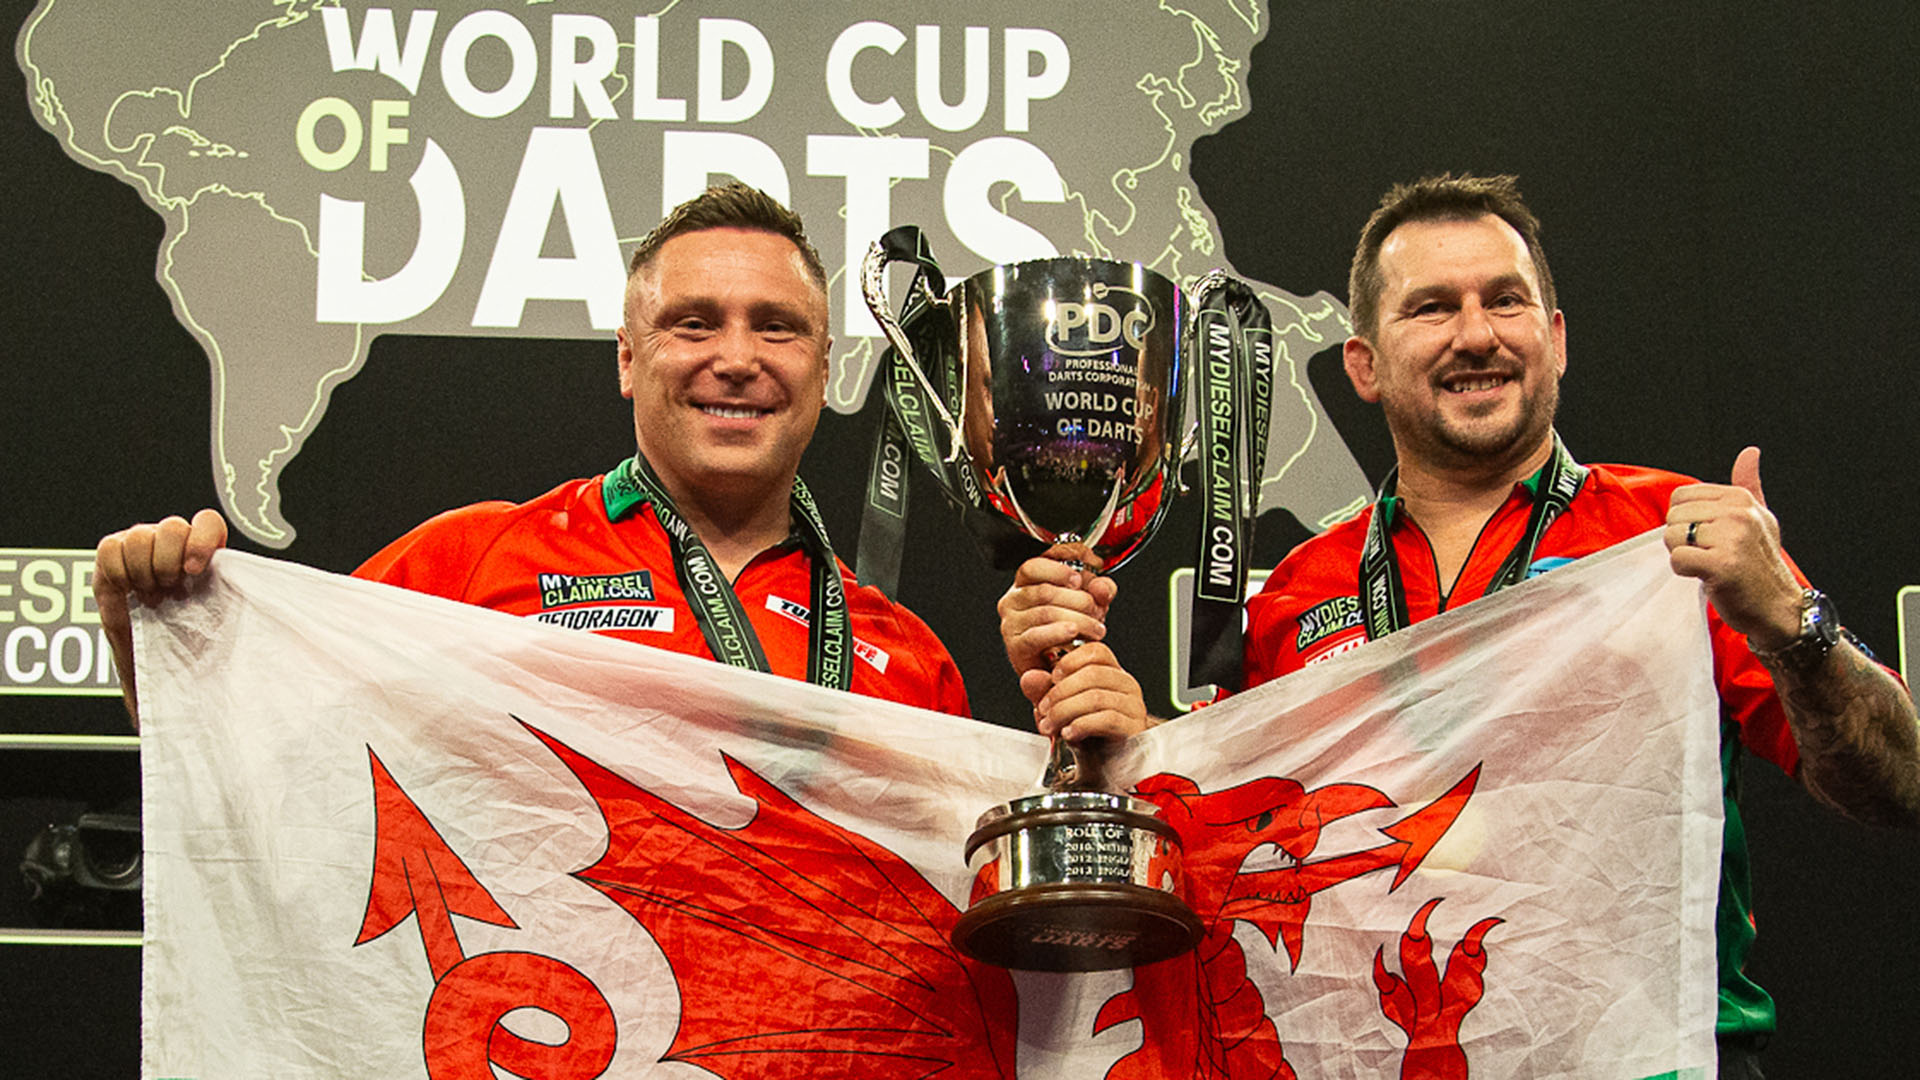 Darts results Gerwyn Price and Jonny Clayton win World Cup of Darts for Wales after beating Scotland in the final